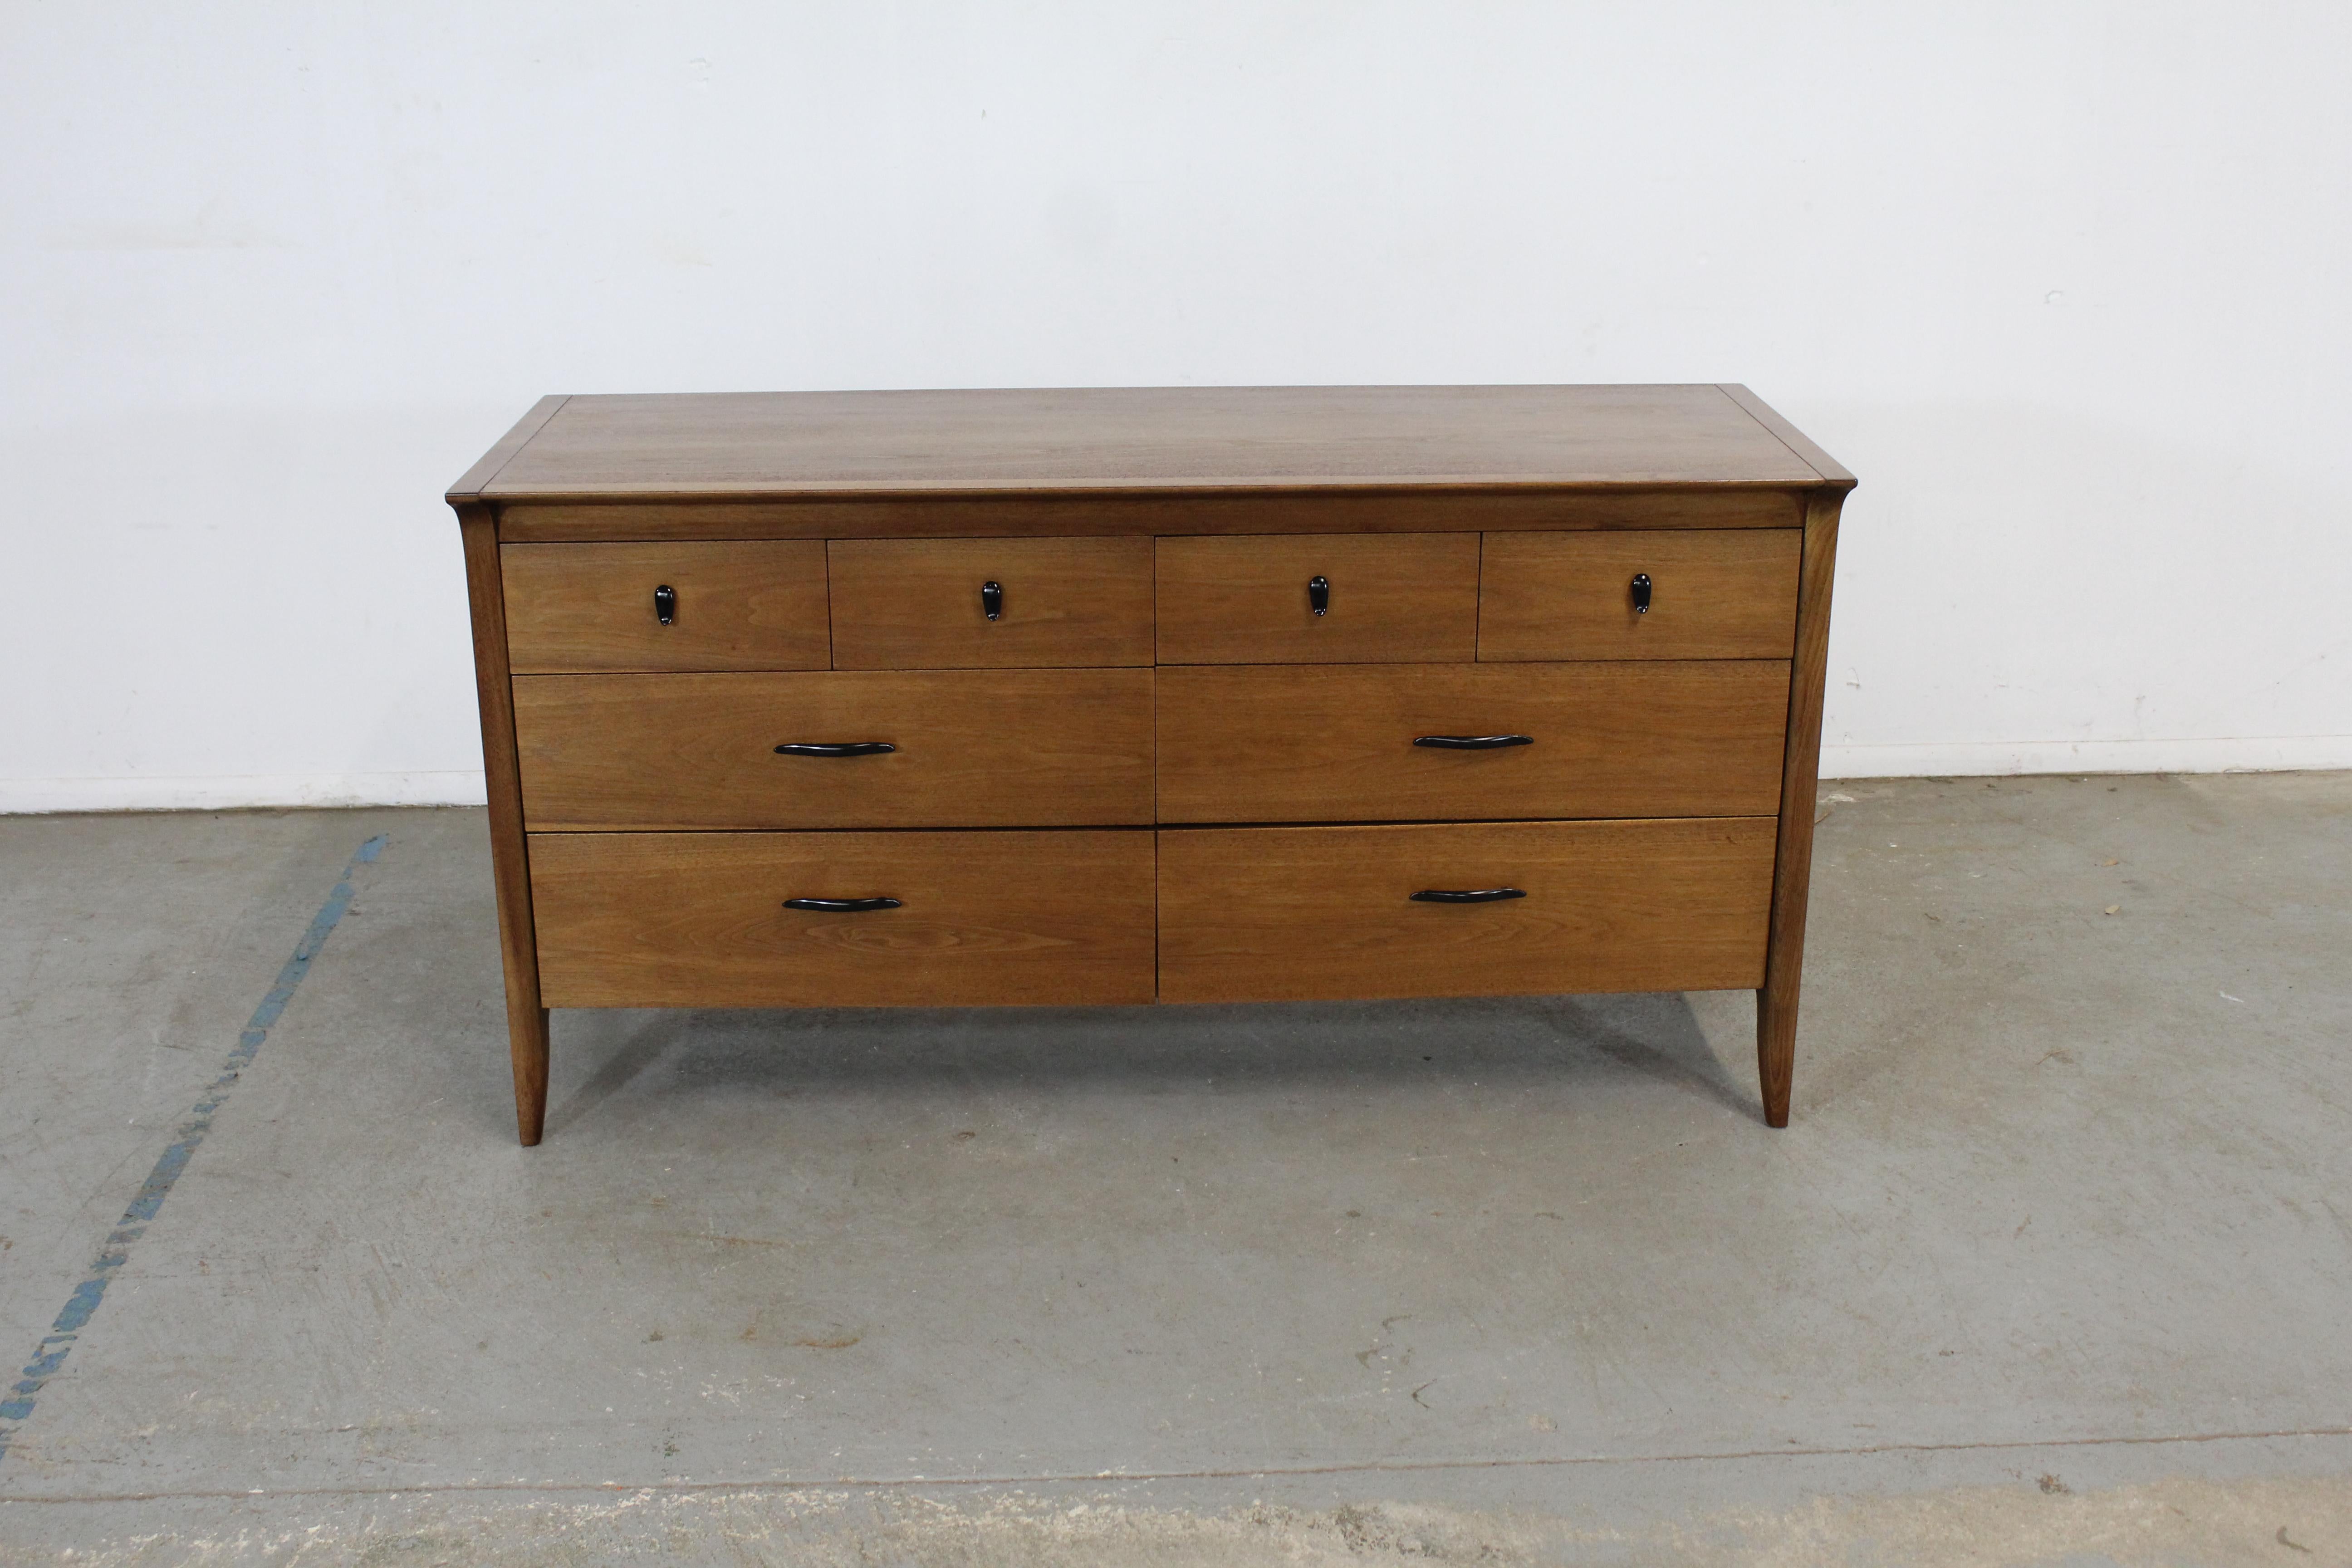 Mid-Century Modern walnut John Van Koert credenza/dresser


Offered is a beautiful Mid-Century Modern walnut John Van Koert tall chest with ample storage space, which was manufactured by Drexel. Features 8 drawers. It has been refinished and is